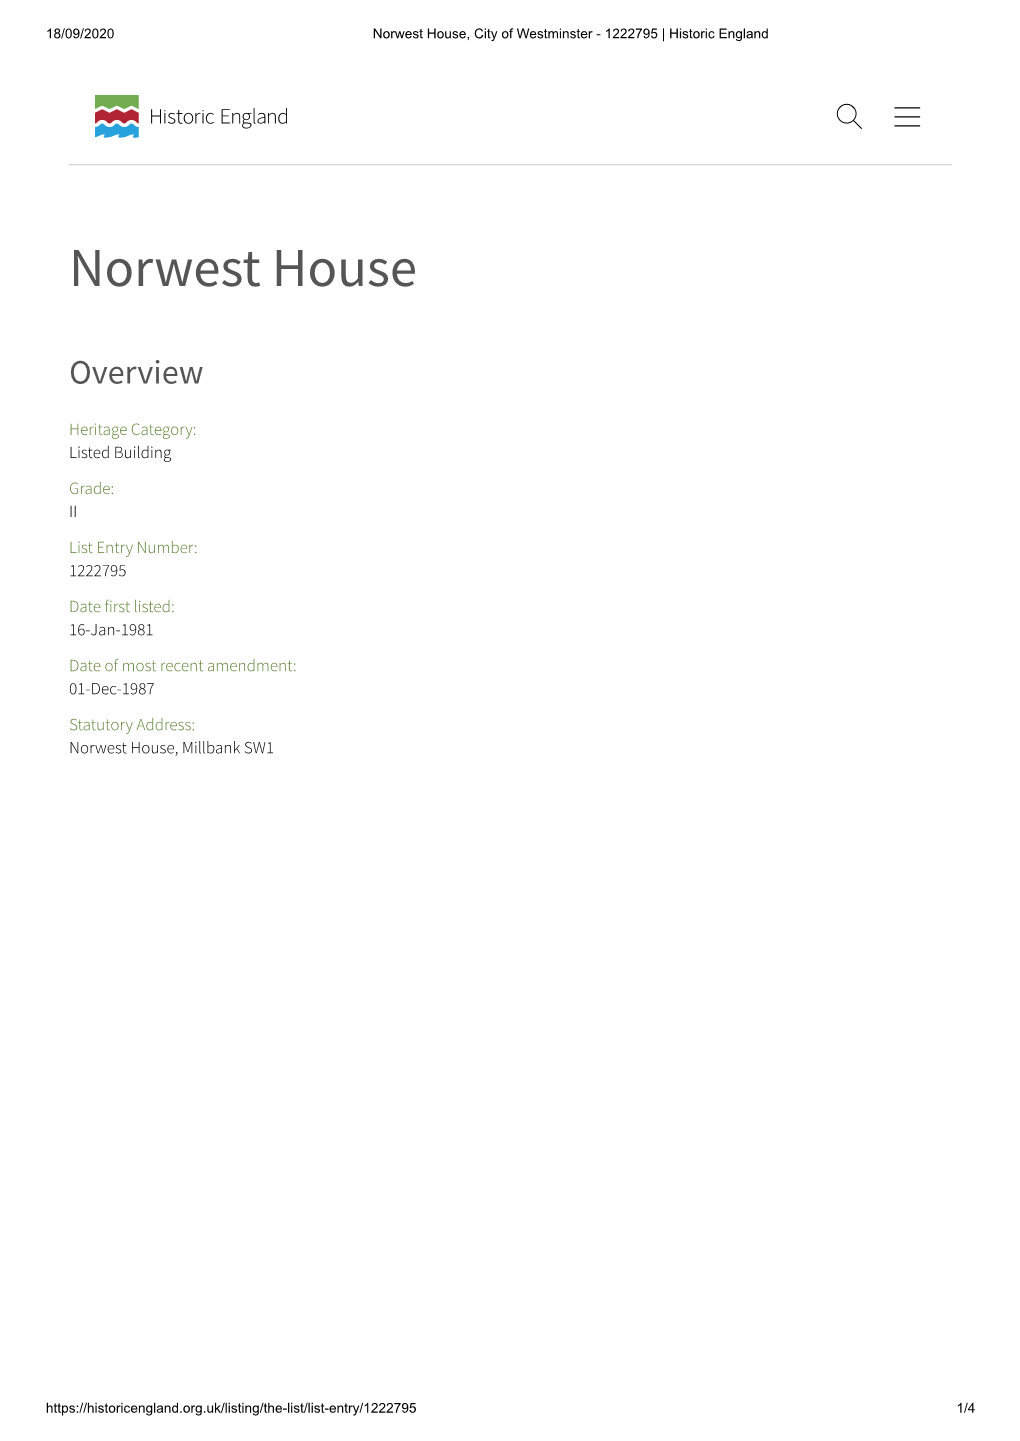 Norwest House Millbank